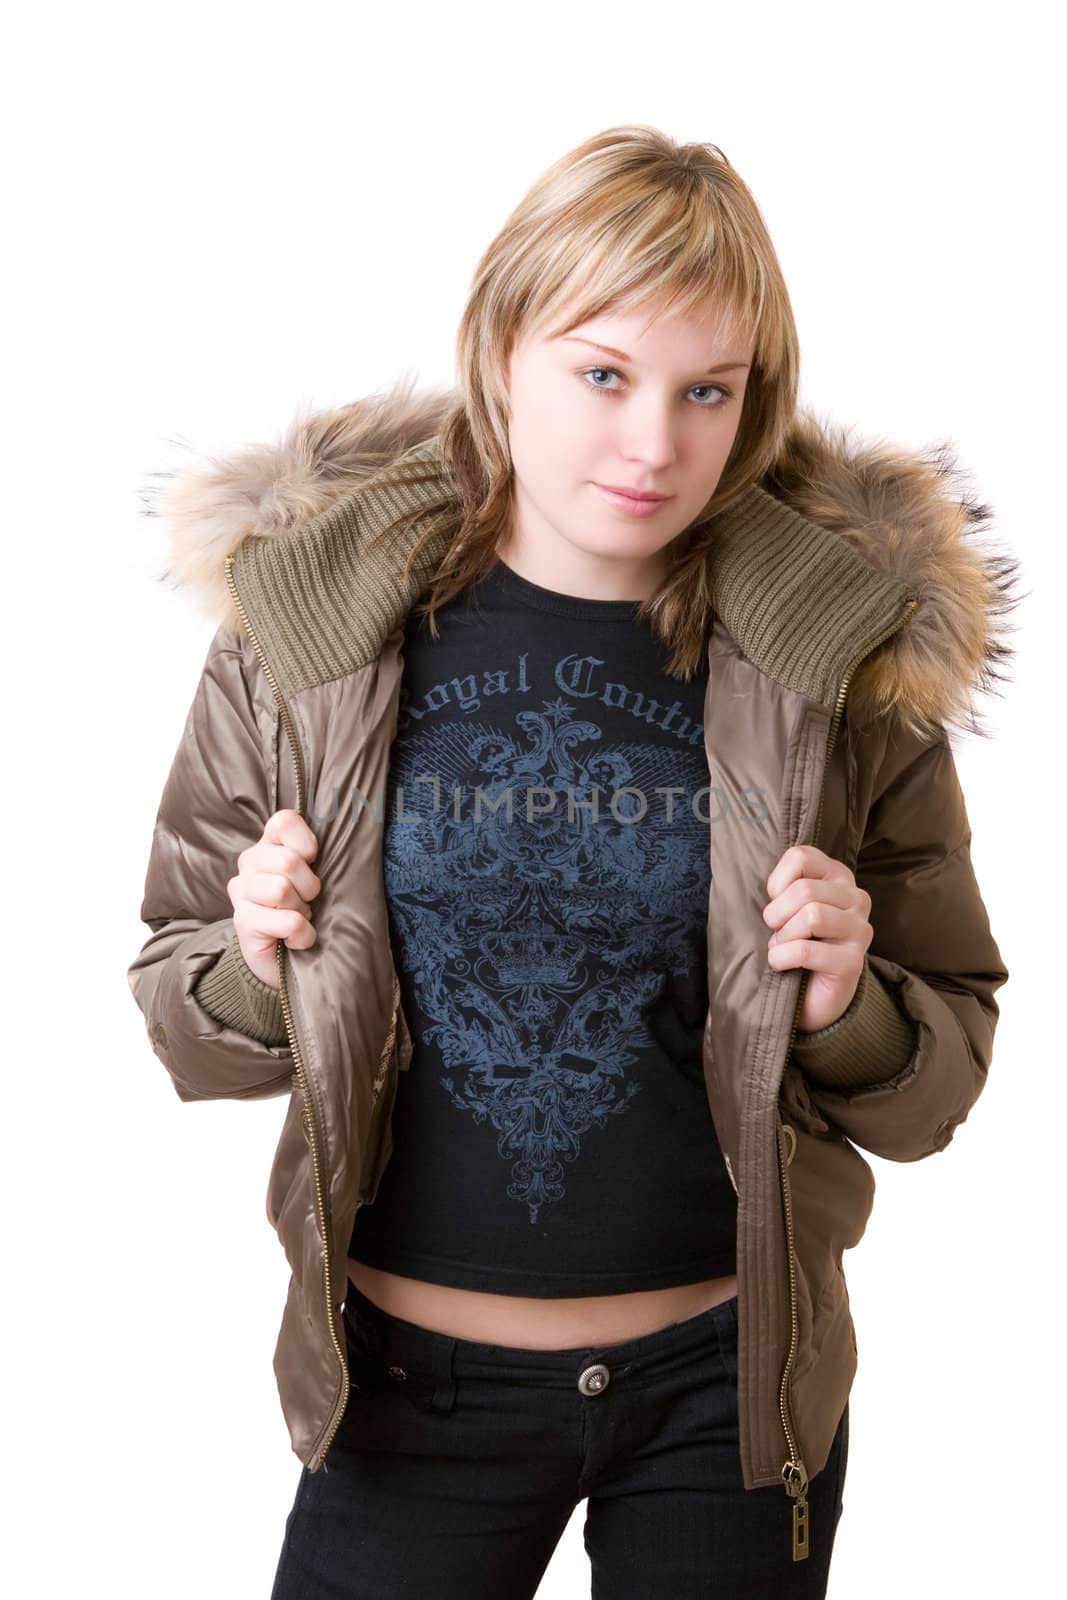 young girl in a jacket by vsurkov